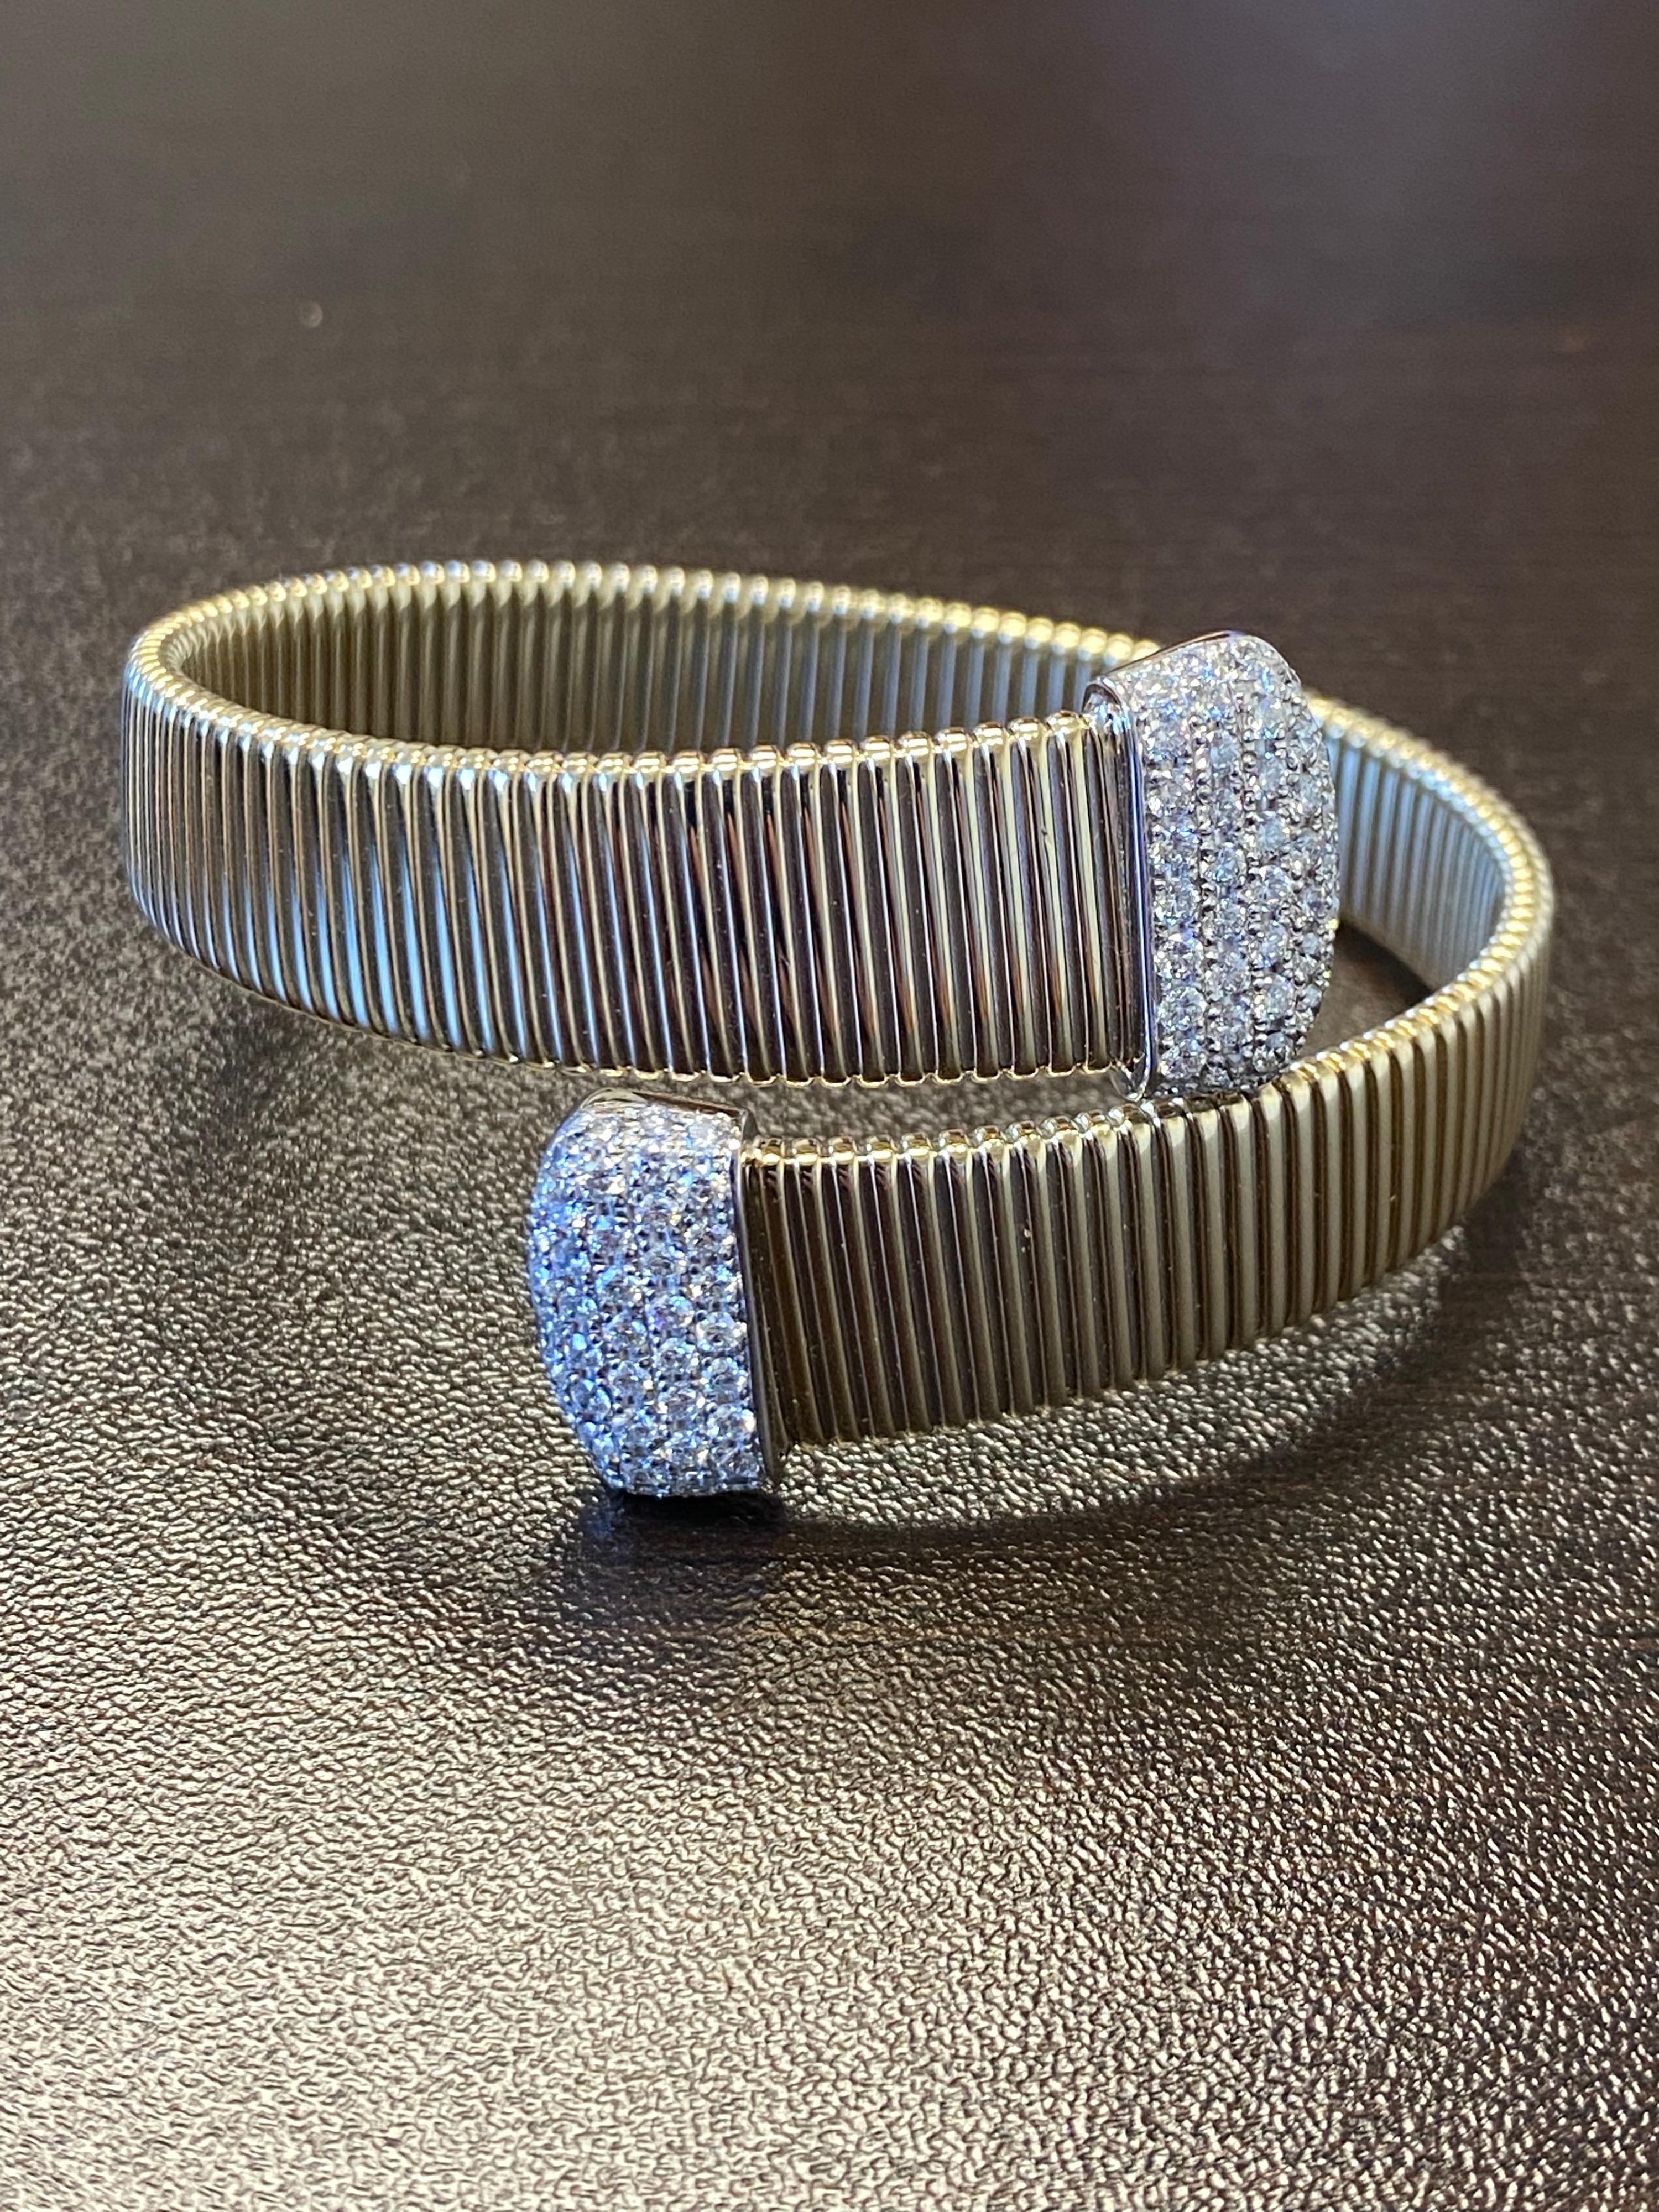 Diamond flex Tubogas bangle set in 14K yellow gold. The total carat weight of the bangle is 2.14. The color of the stones are G-H, the clarity is SI. The bangle is available in rose gold.